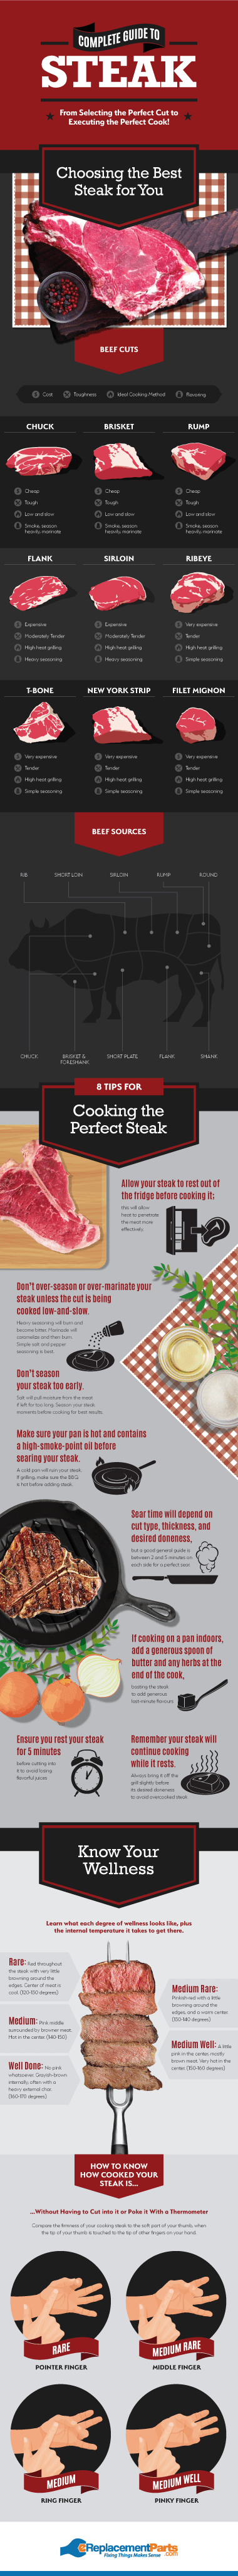 steak guide with description of beef sources and cooking tips